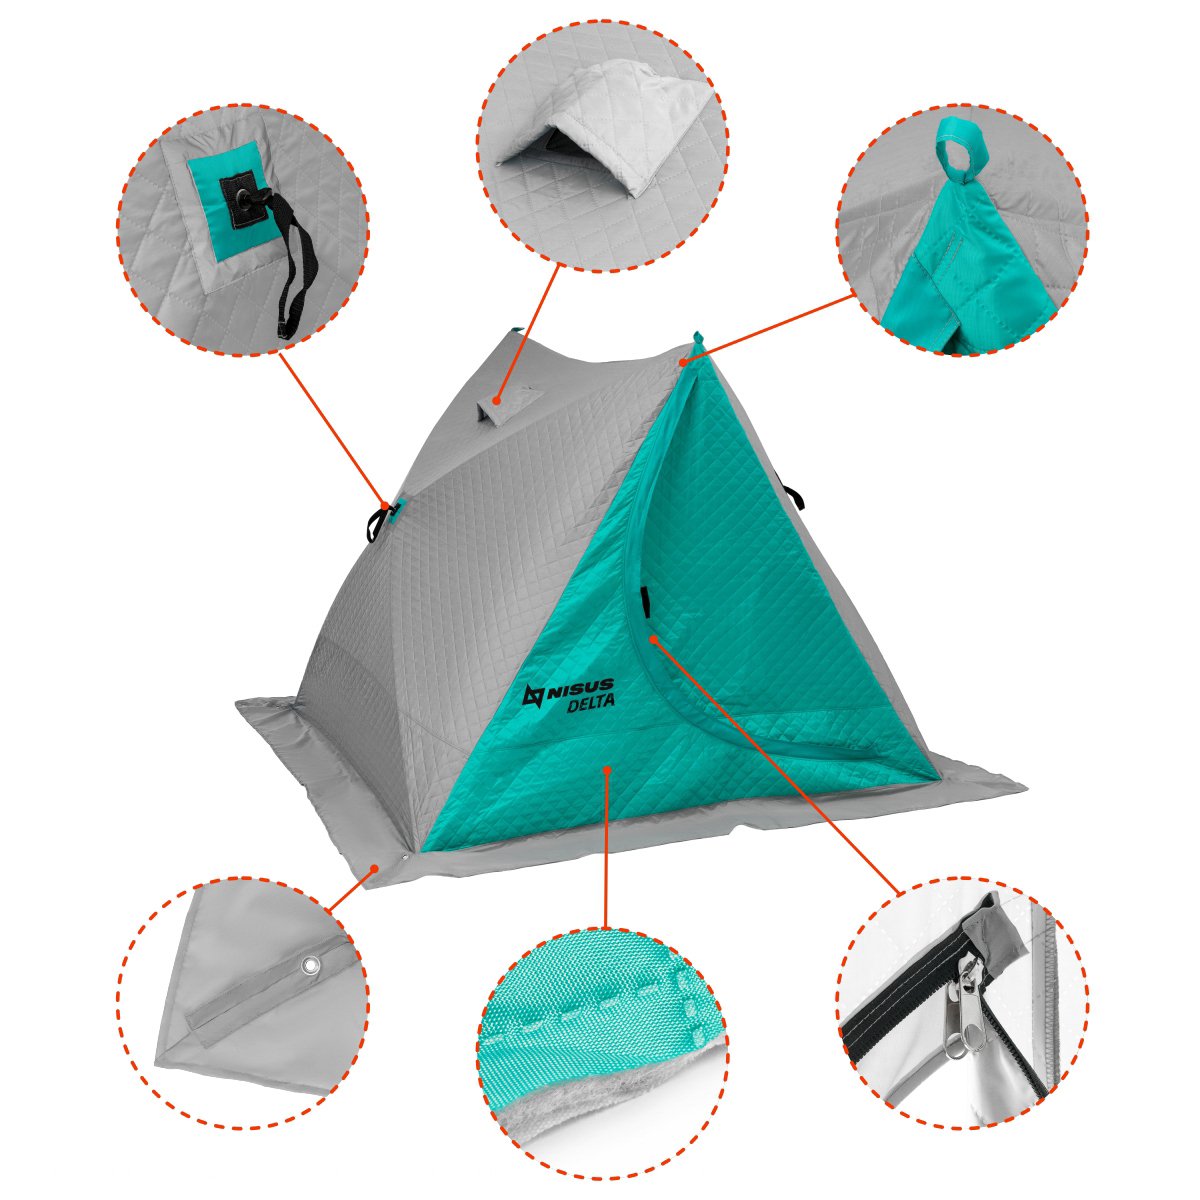 Delta Portable Insulated Ice Fishing Tent 2 Person Shelter is equipped with an extra wide protective skirt with apertures for ice anchors to fix the shelter, and zippers to widely open/close the shelter